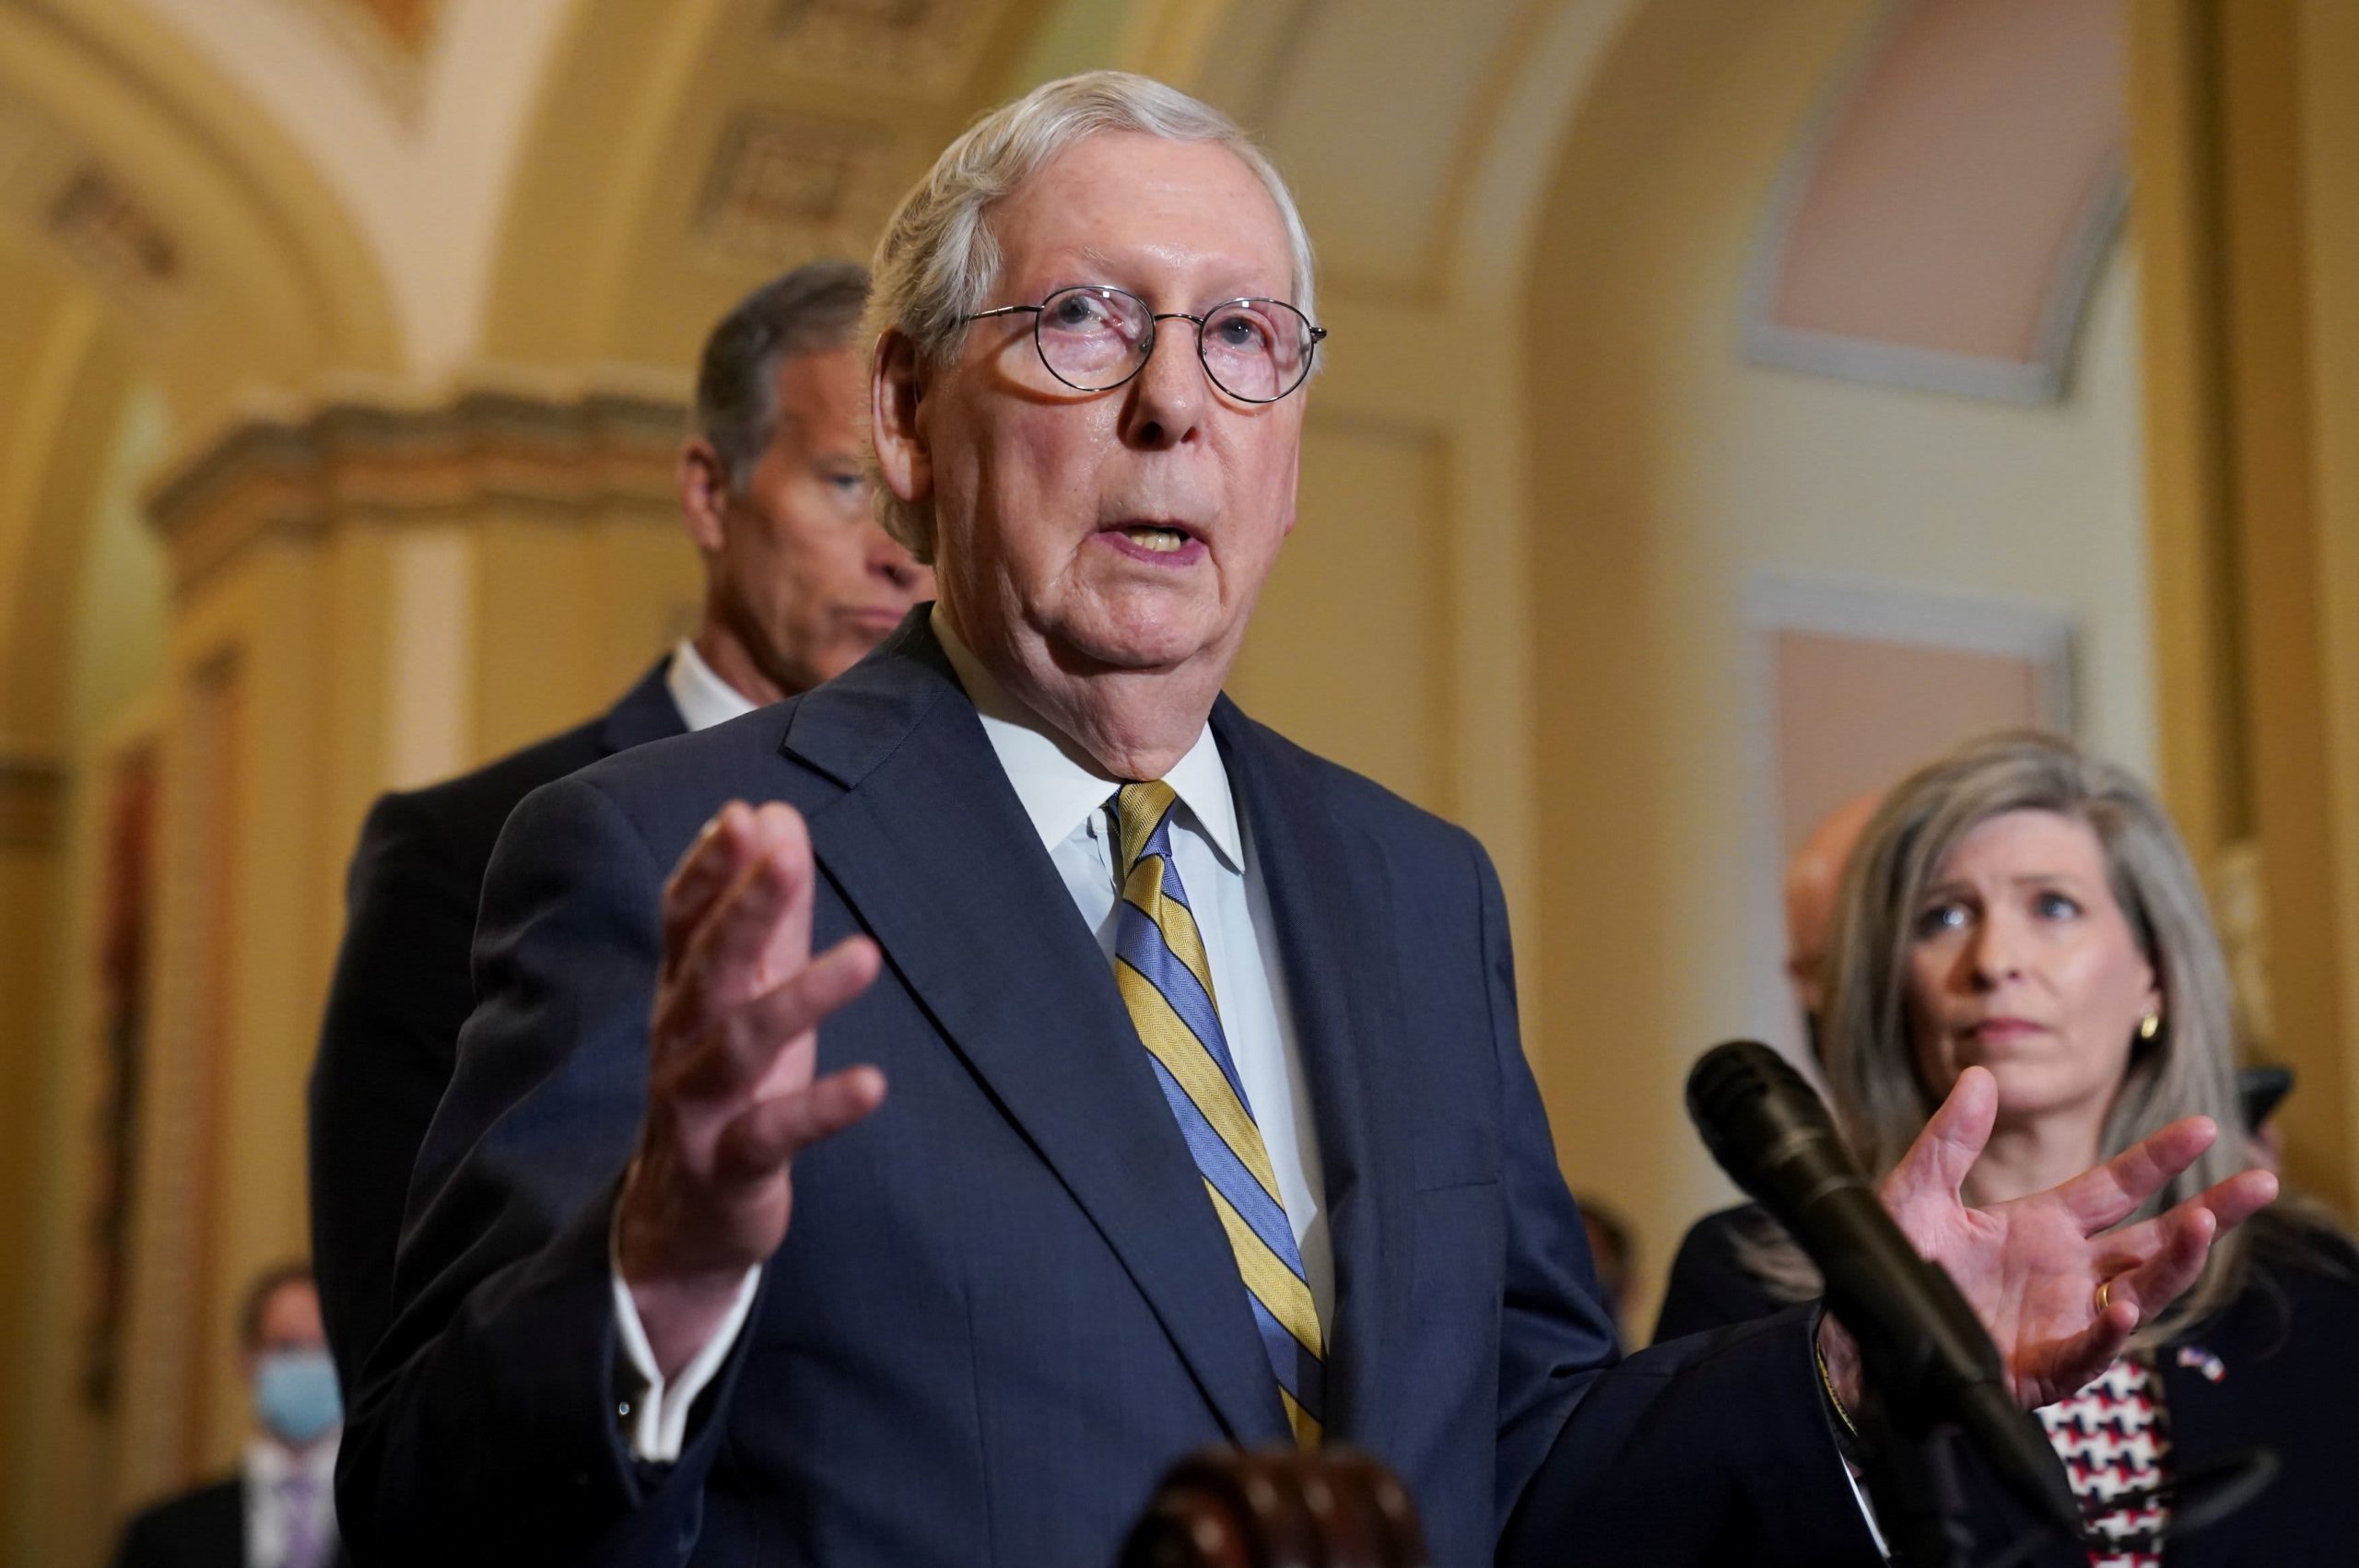 Mitch McConnell may offer short-term debt ceiling extension following pressure from Biden